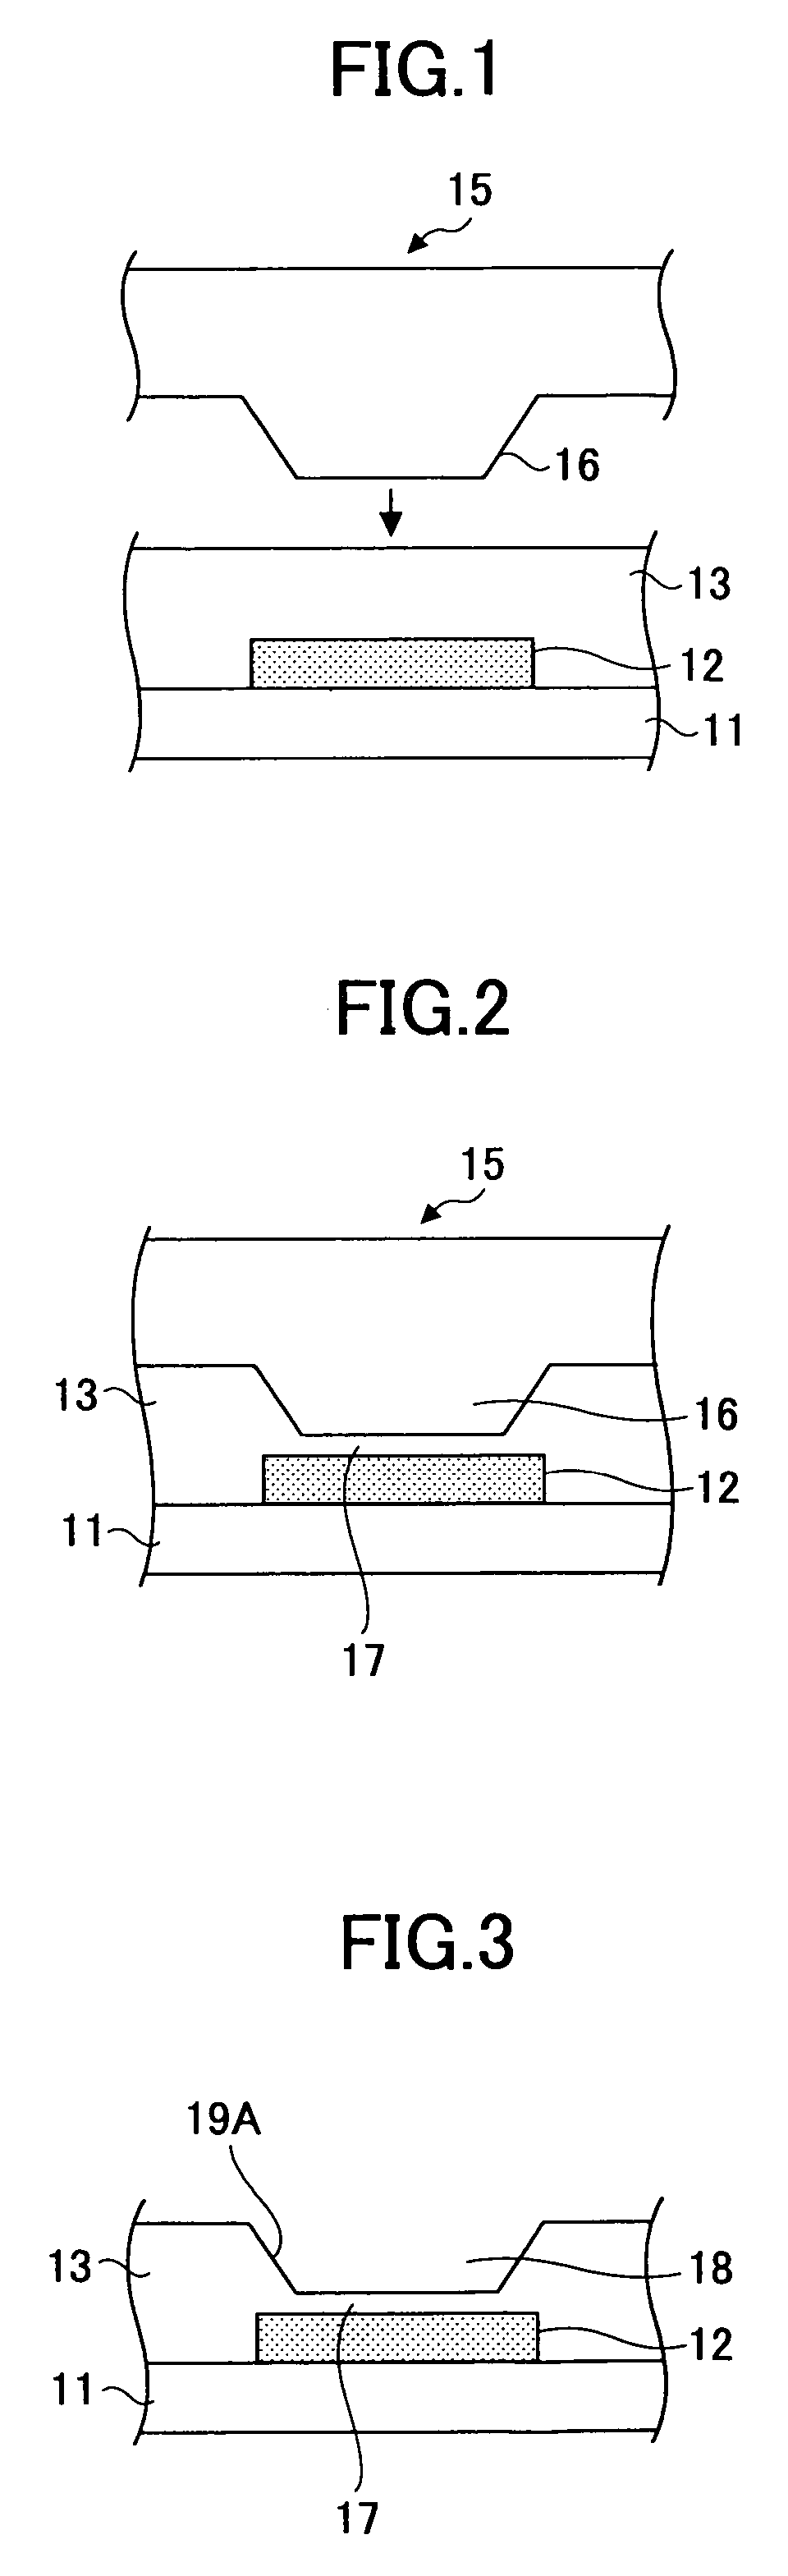 Method of producing multilayer interconnection board